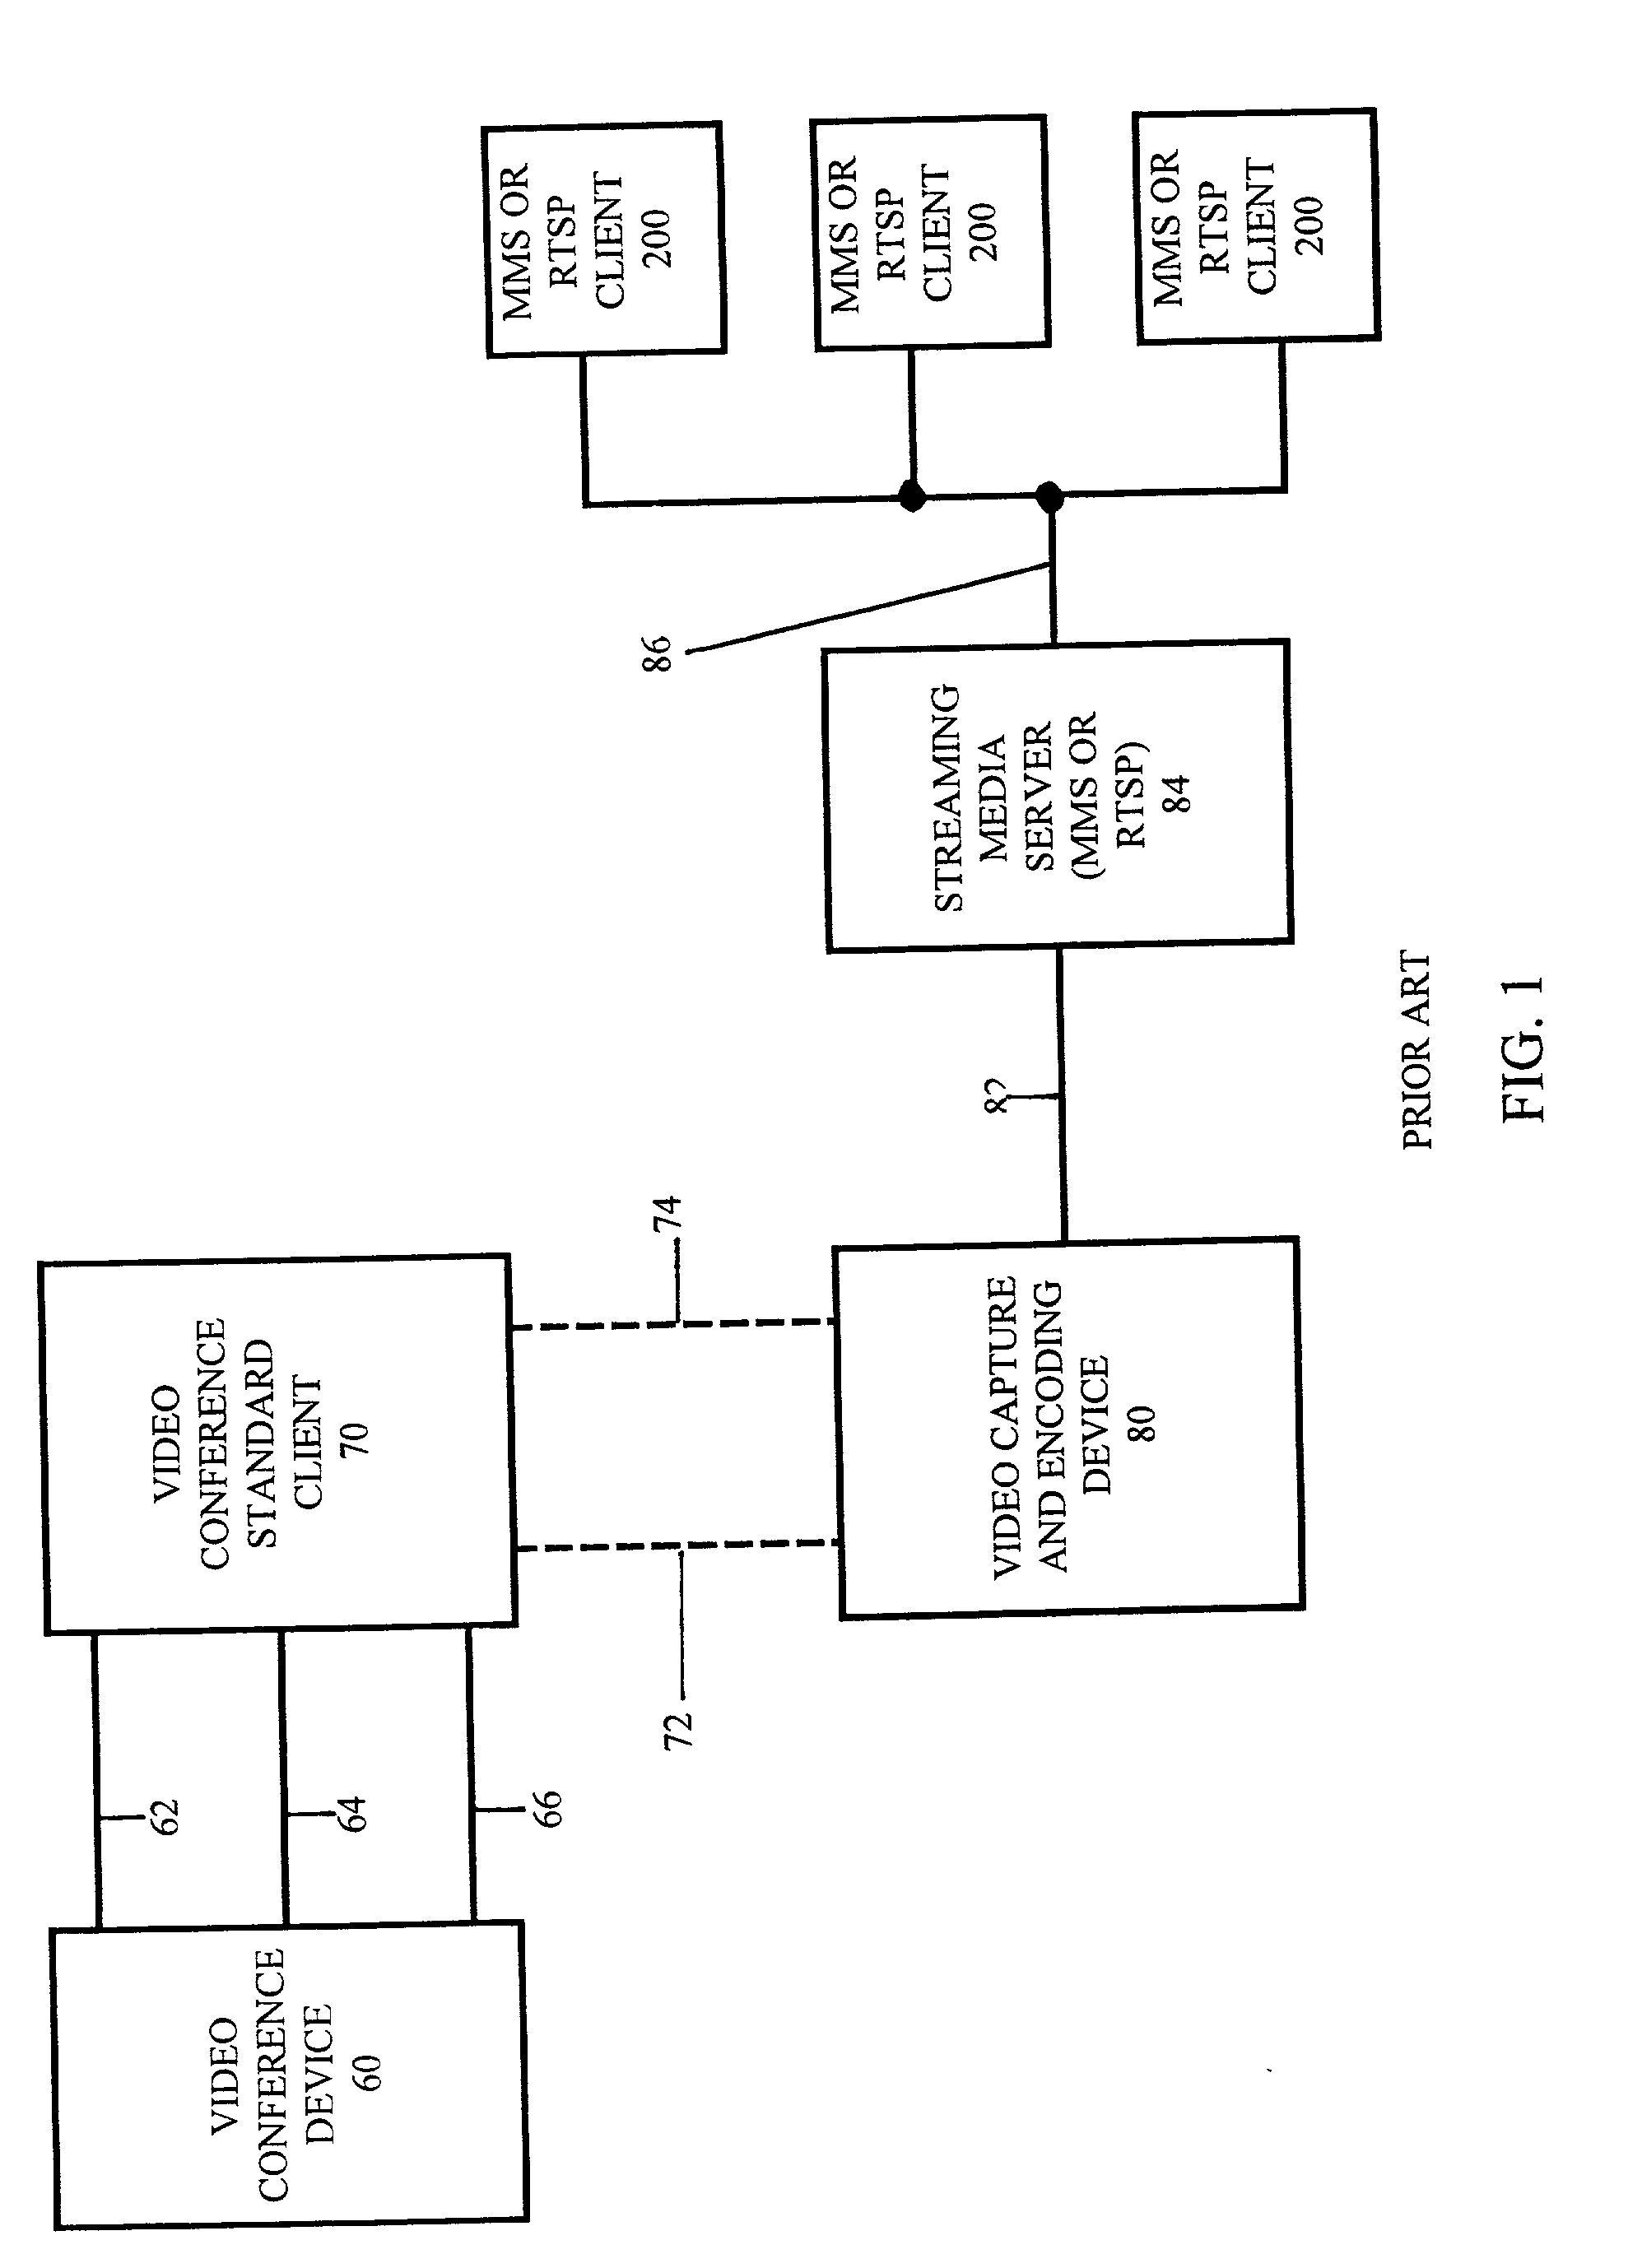 Systems and methods for connecting video conferencing to a distributed network